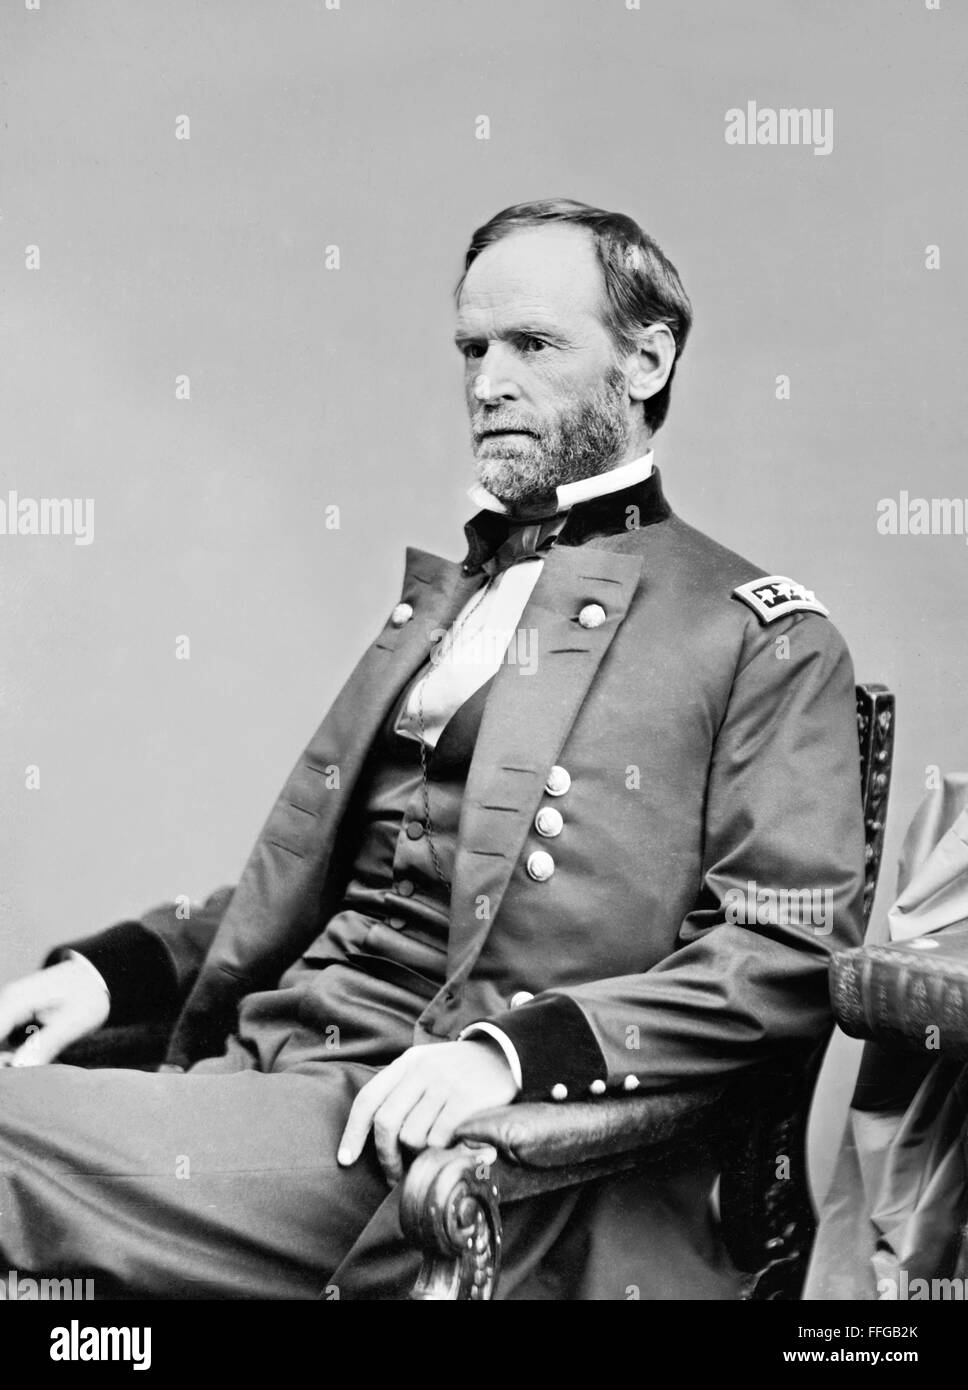 General Sherman. Portrait of General William Tecumseh Sherman, commander in the Union army during the American Civil War, c. 1860-1875 Stock Photo